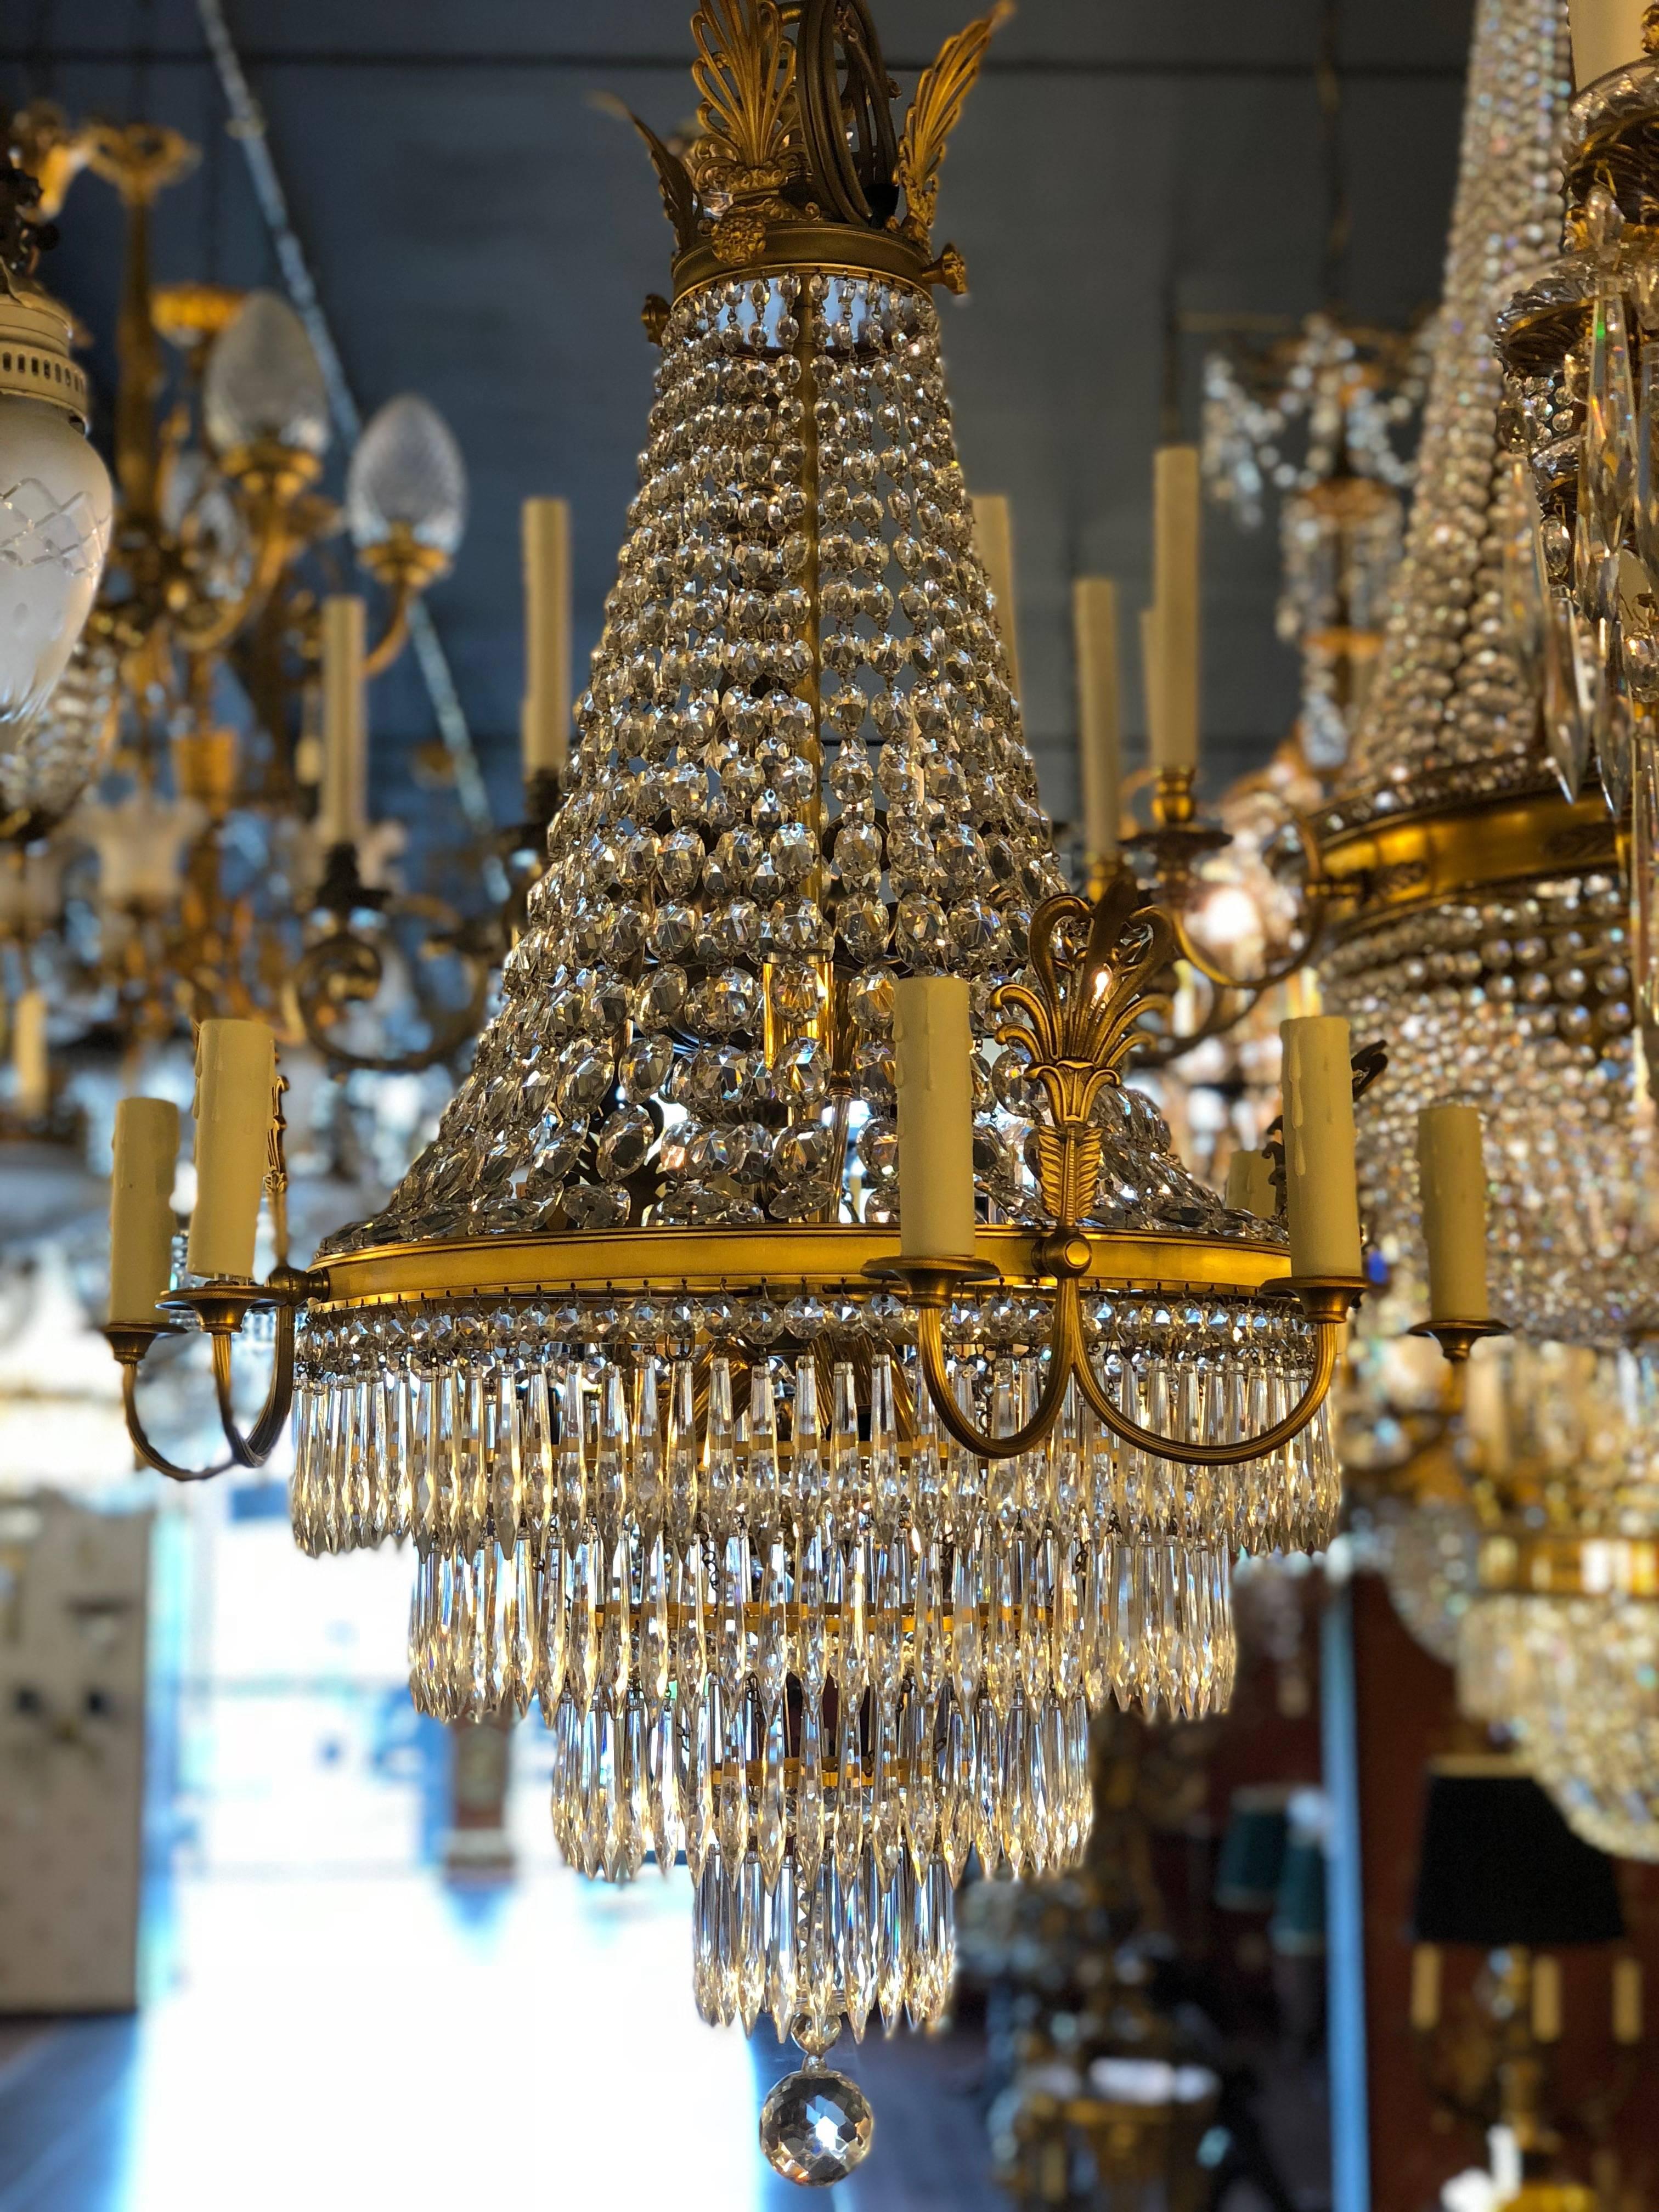 This French Second Empire gilt bronze chandelier with 4 x 2 arms recently restored, cabling and sockets were completely renewed.

 